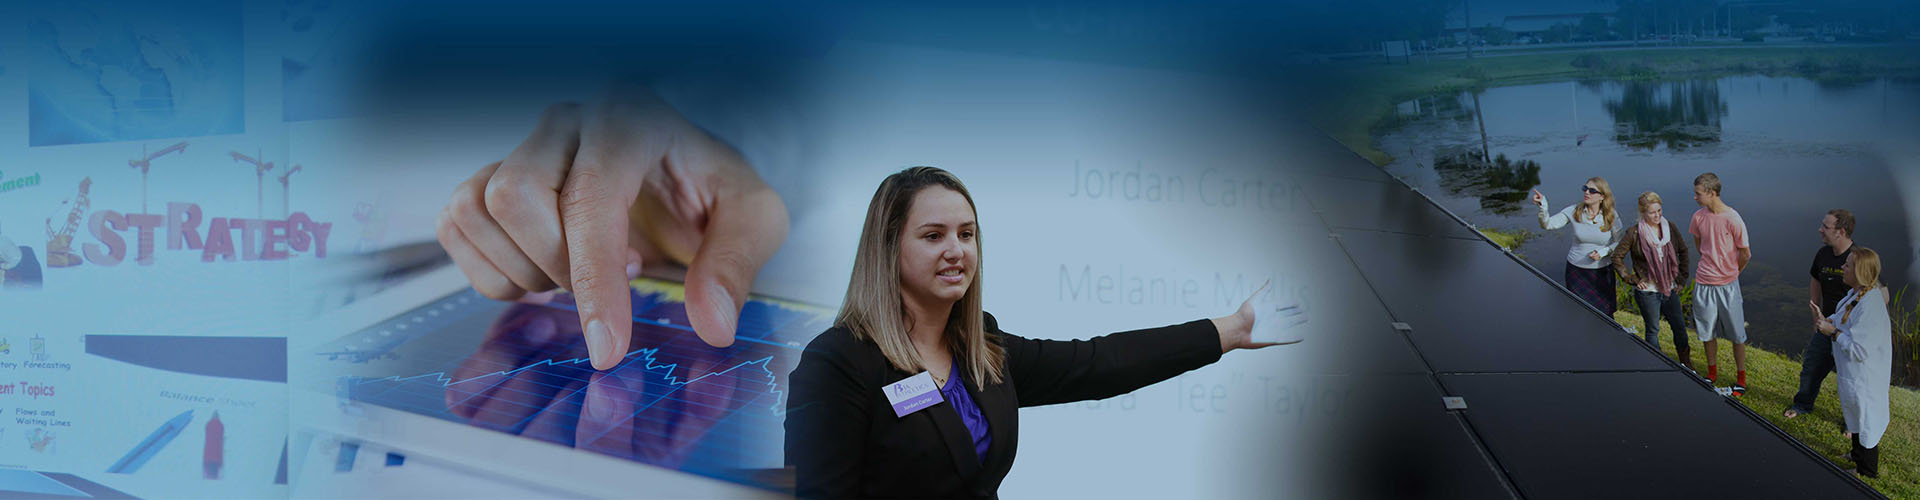 A collage of a businessman's hand manipulating a line graph on a tablet, a woman wearing a business suit presenting in from of a projector screen, and woman in a lab coat showing a group of people a solar array.